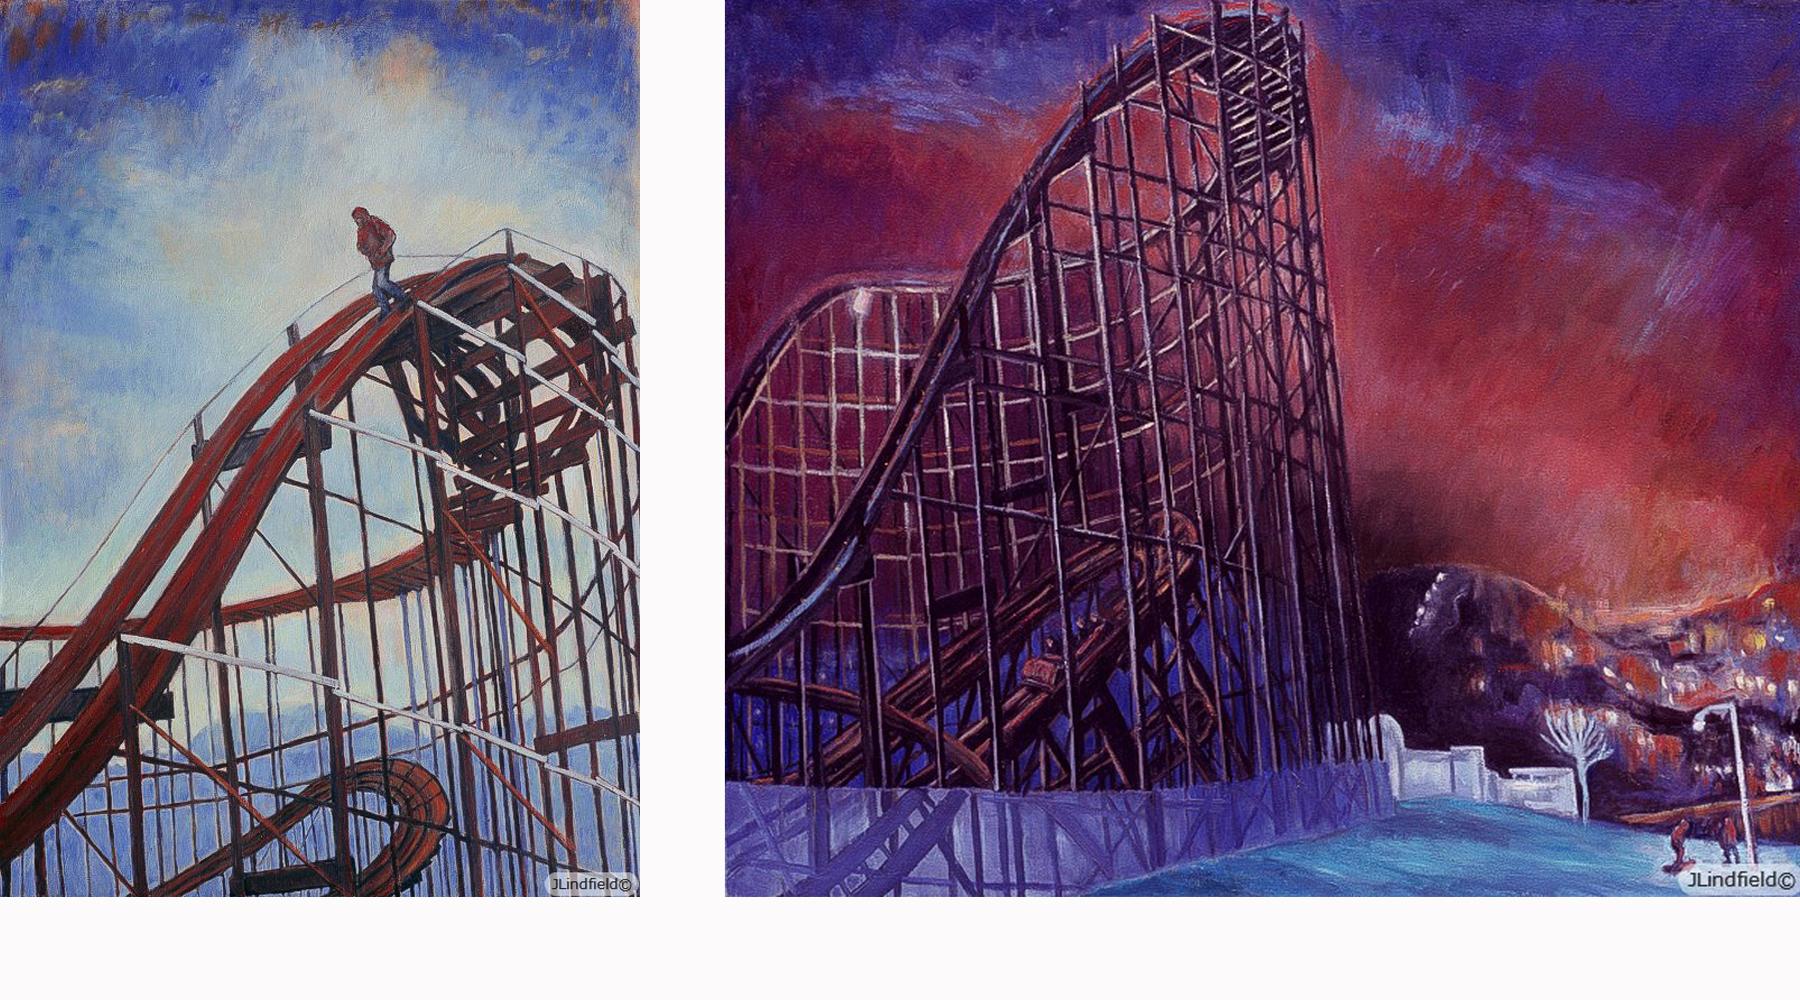 Man on Rollercoaster and Nigh Boarders (C) James Lindfield